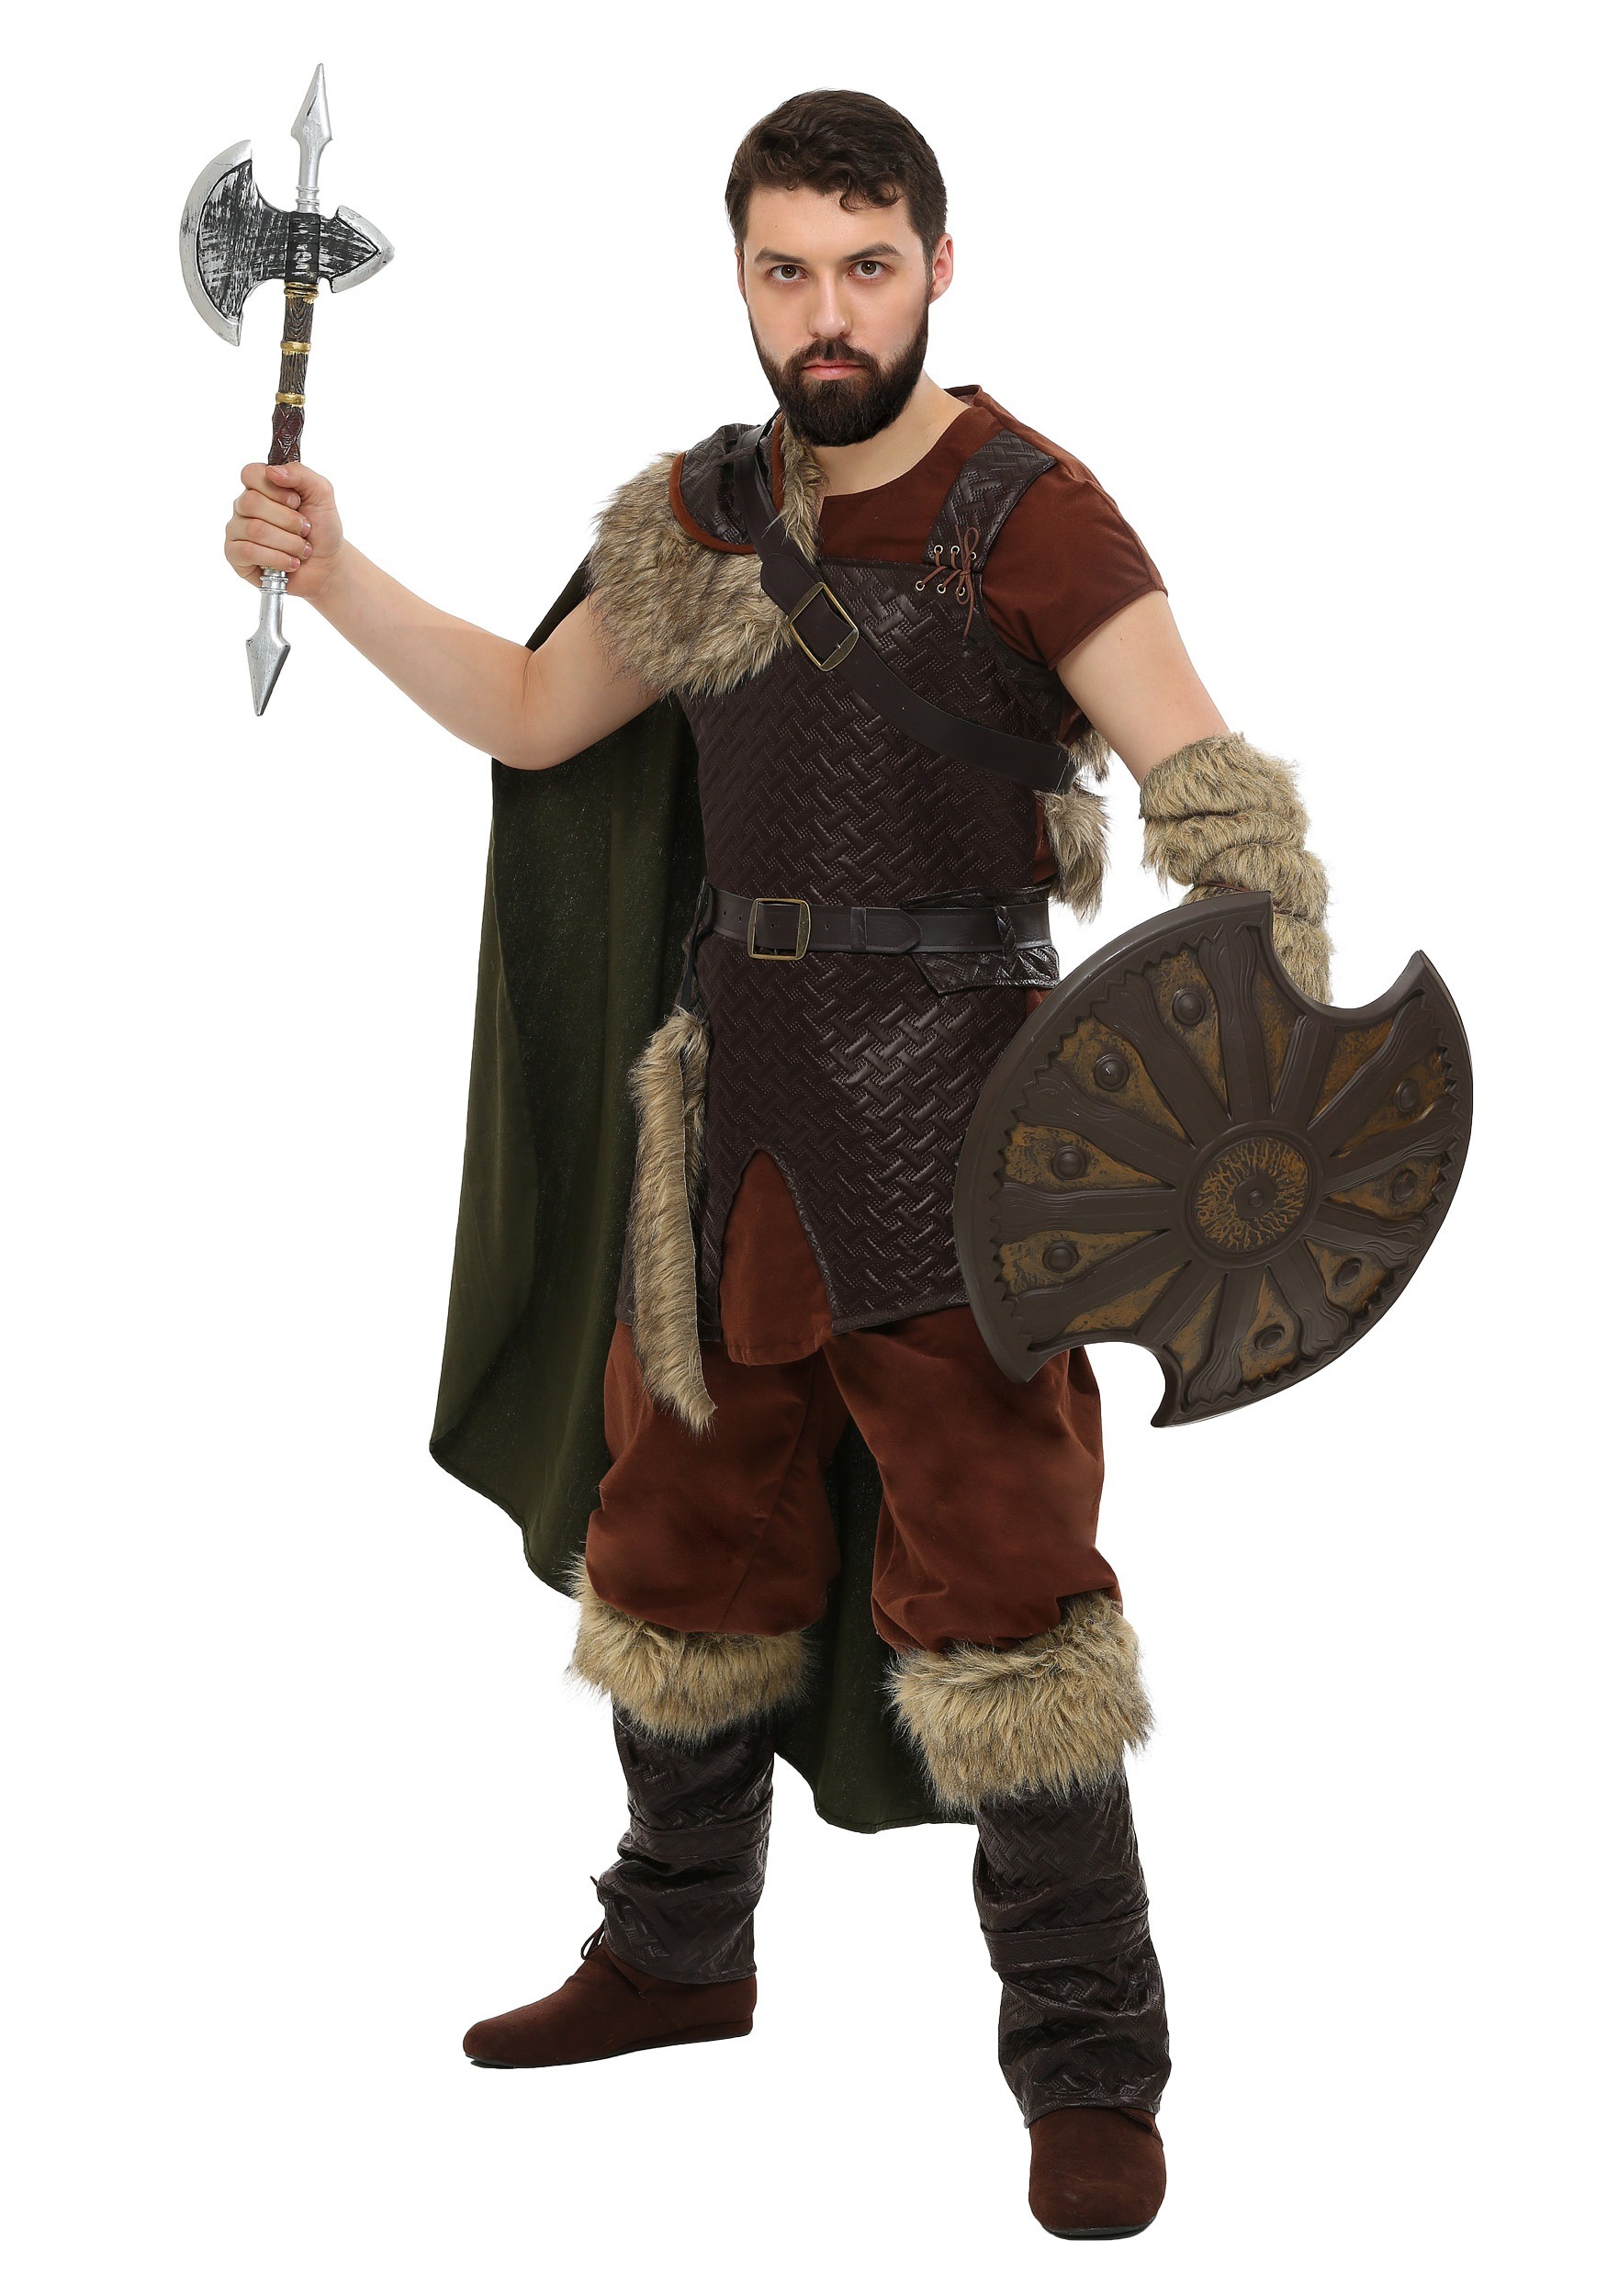 https://images.fun.com/products/40500/1-1/plus-size-nordic-viking-costume.jpg